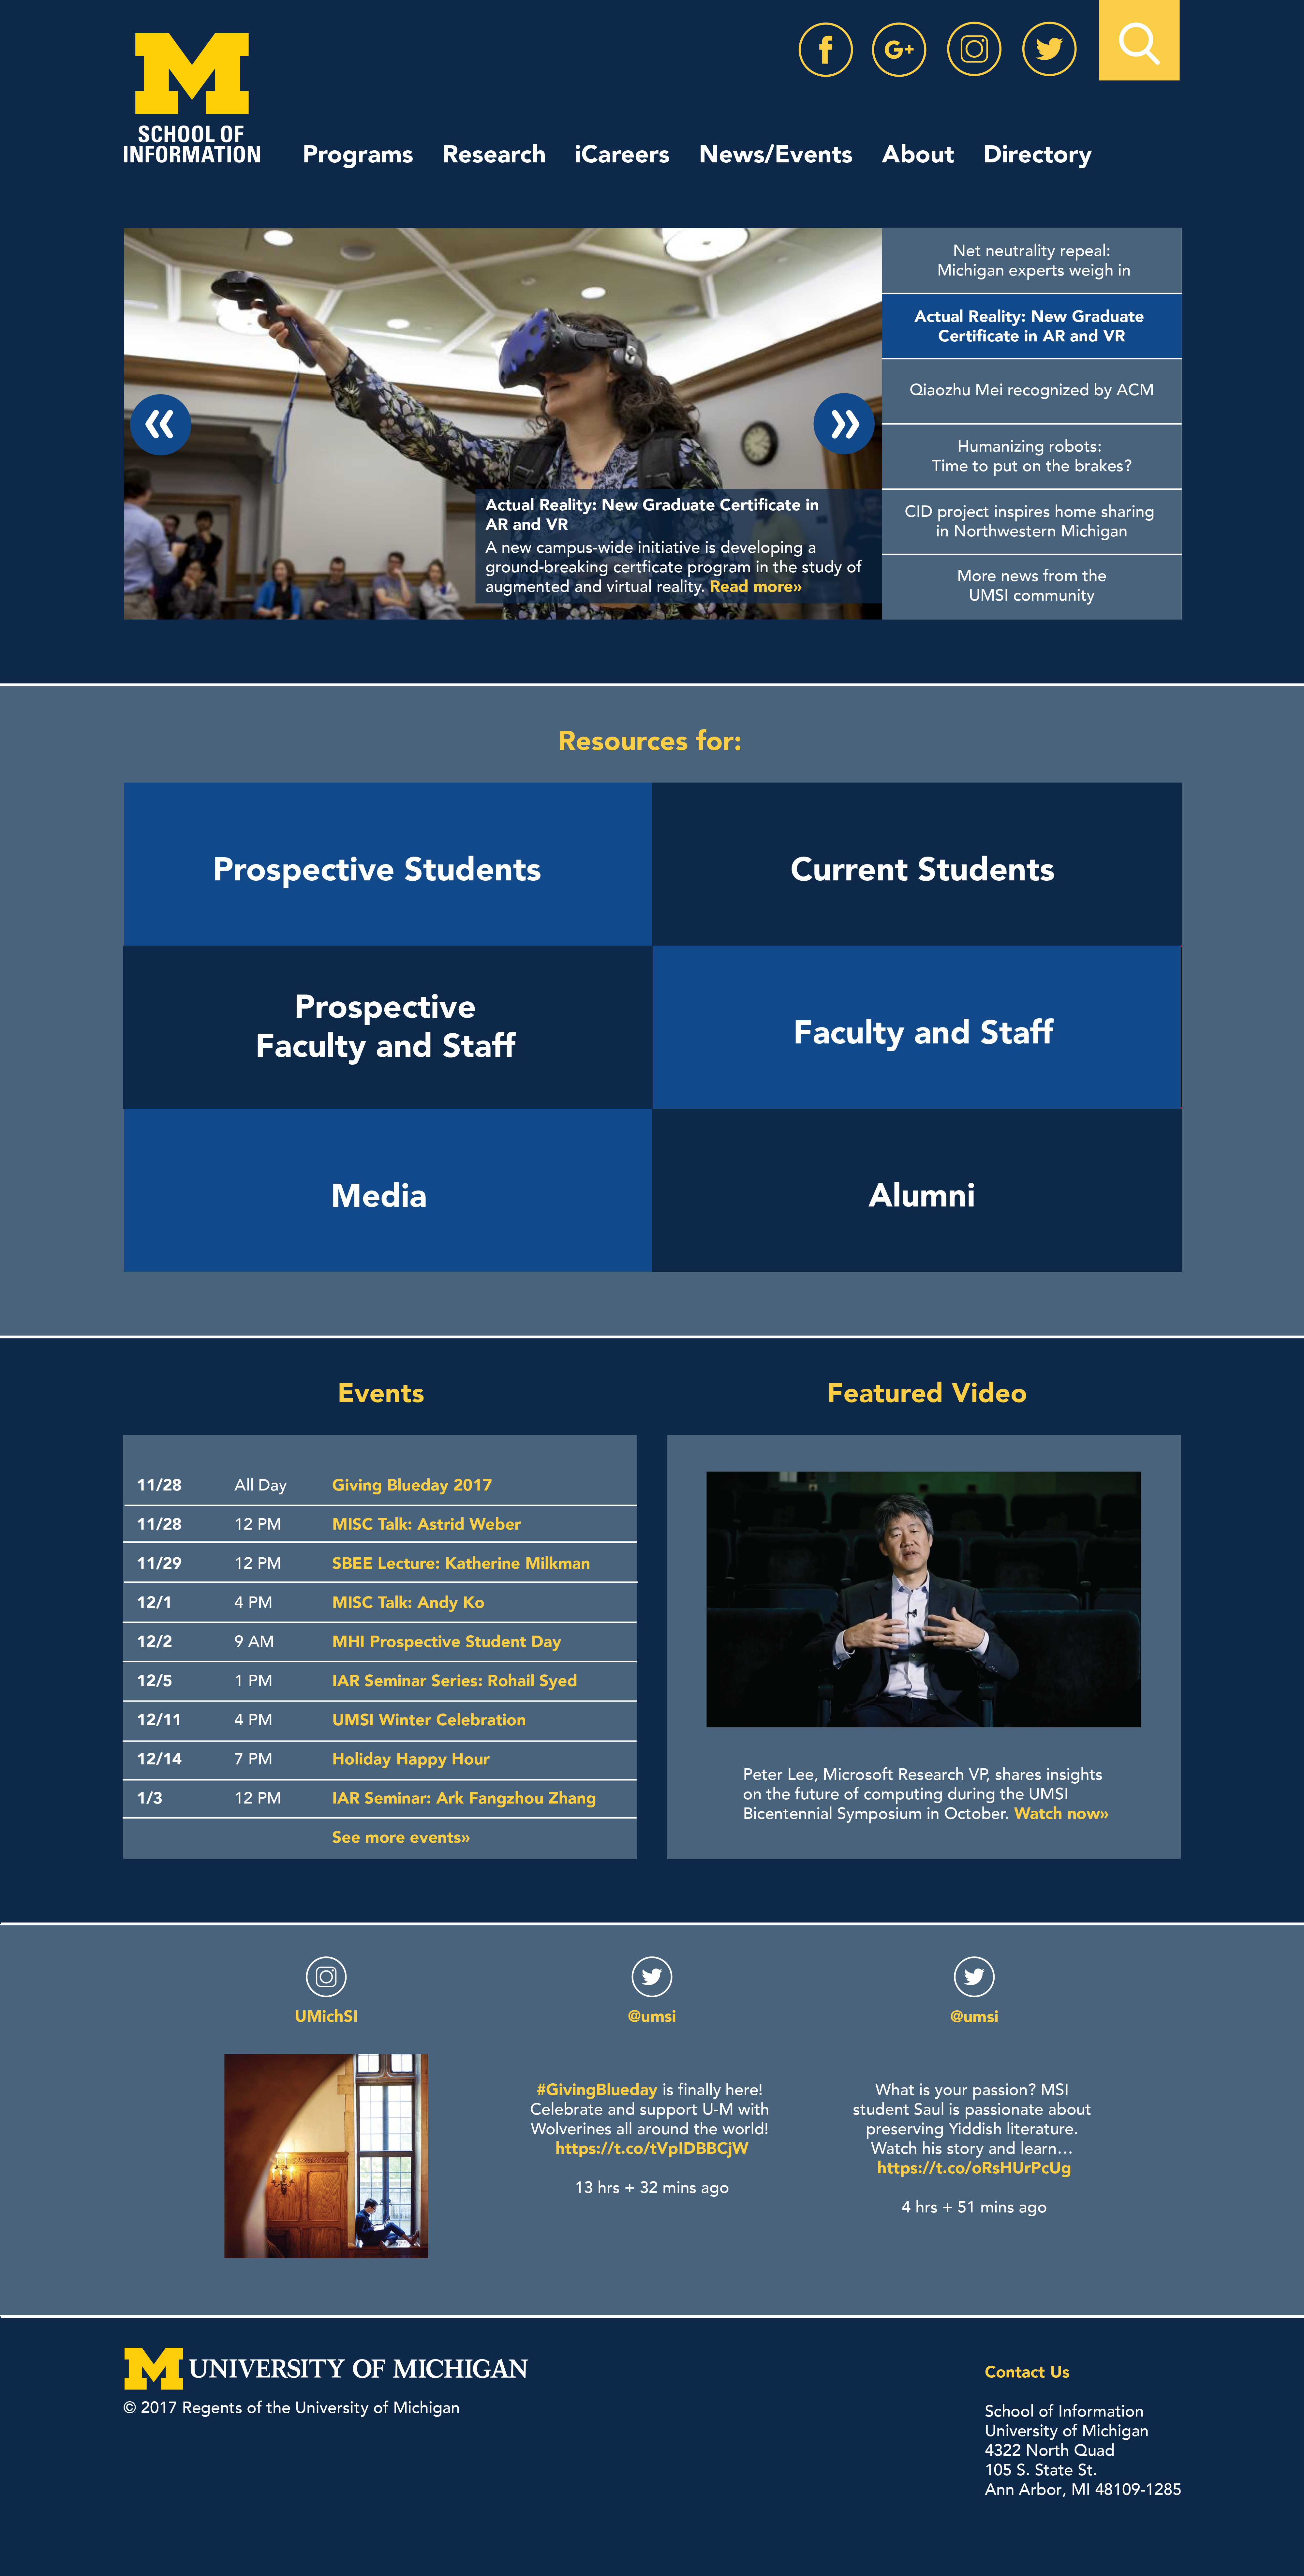 A mock-up of the UMSI website redesigned. Image links to full-size image.